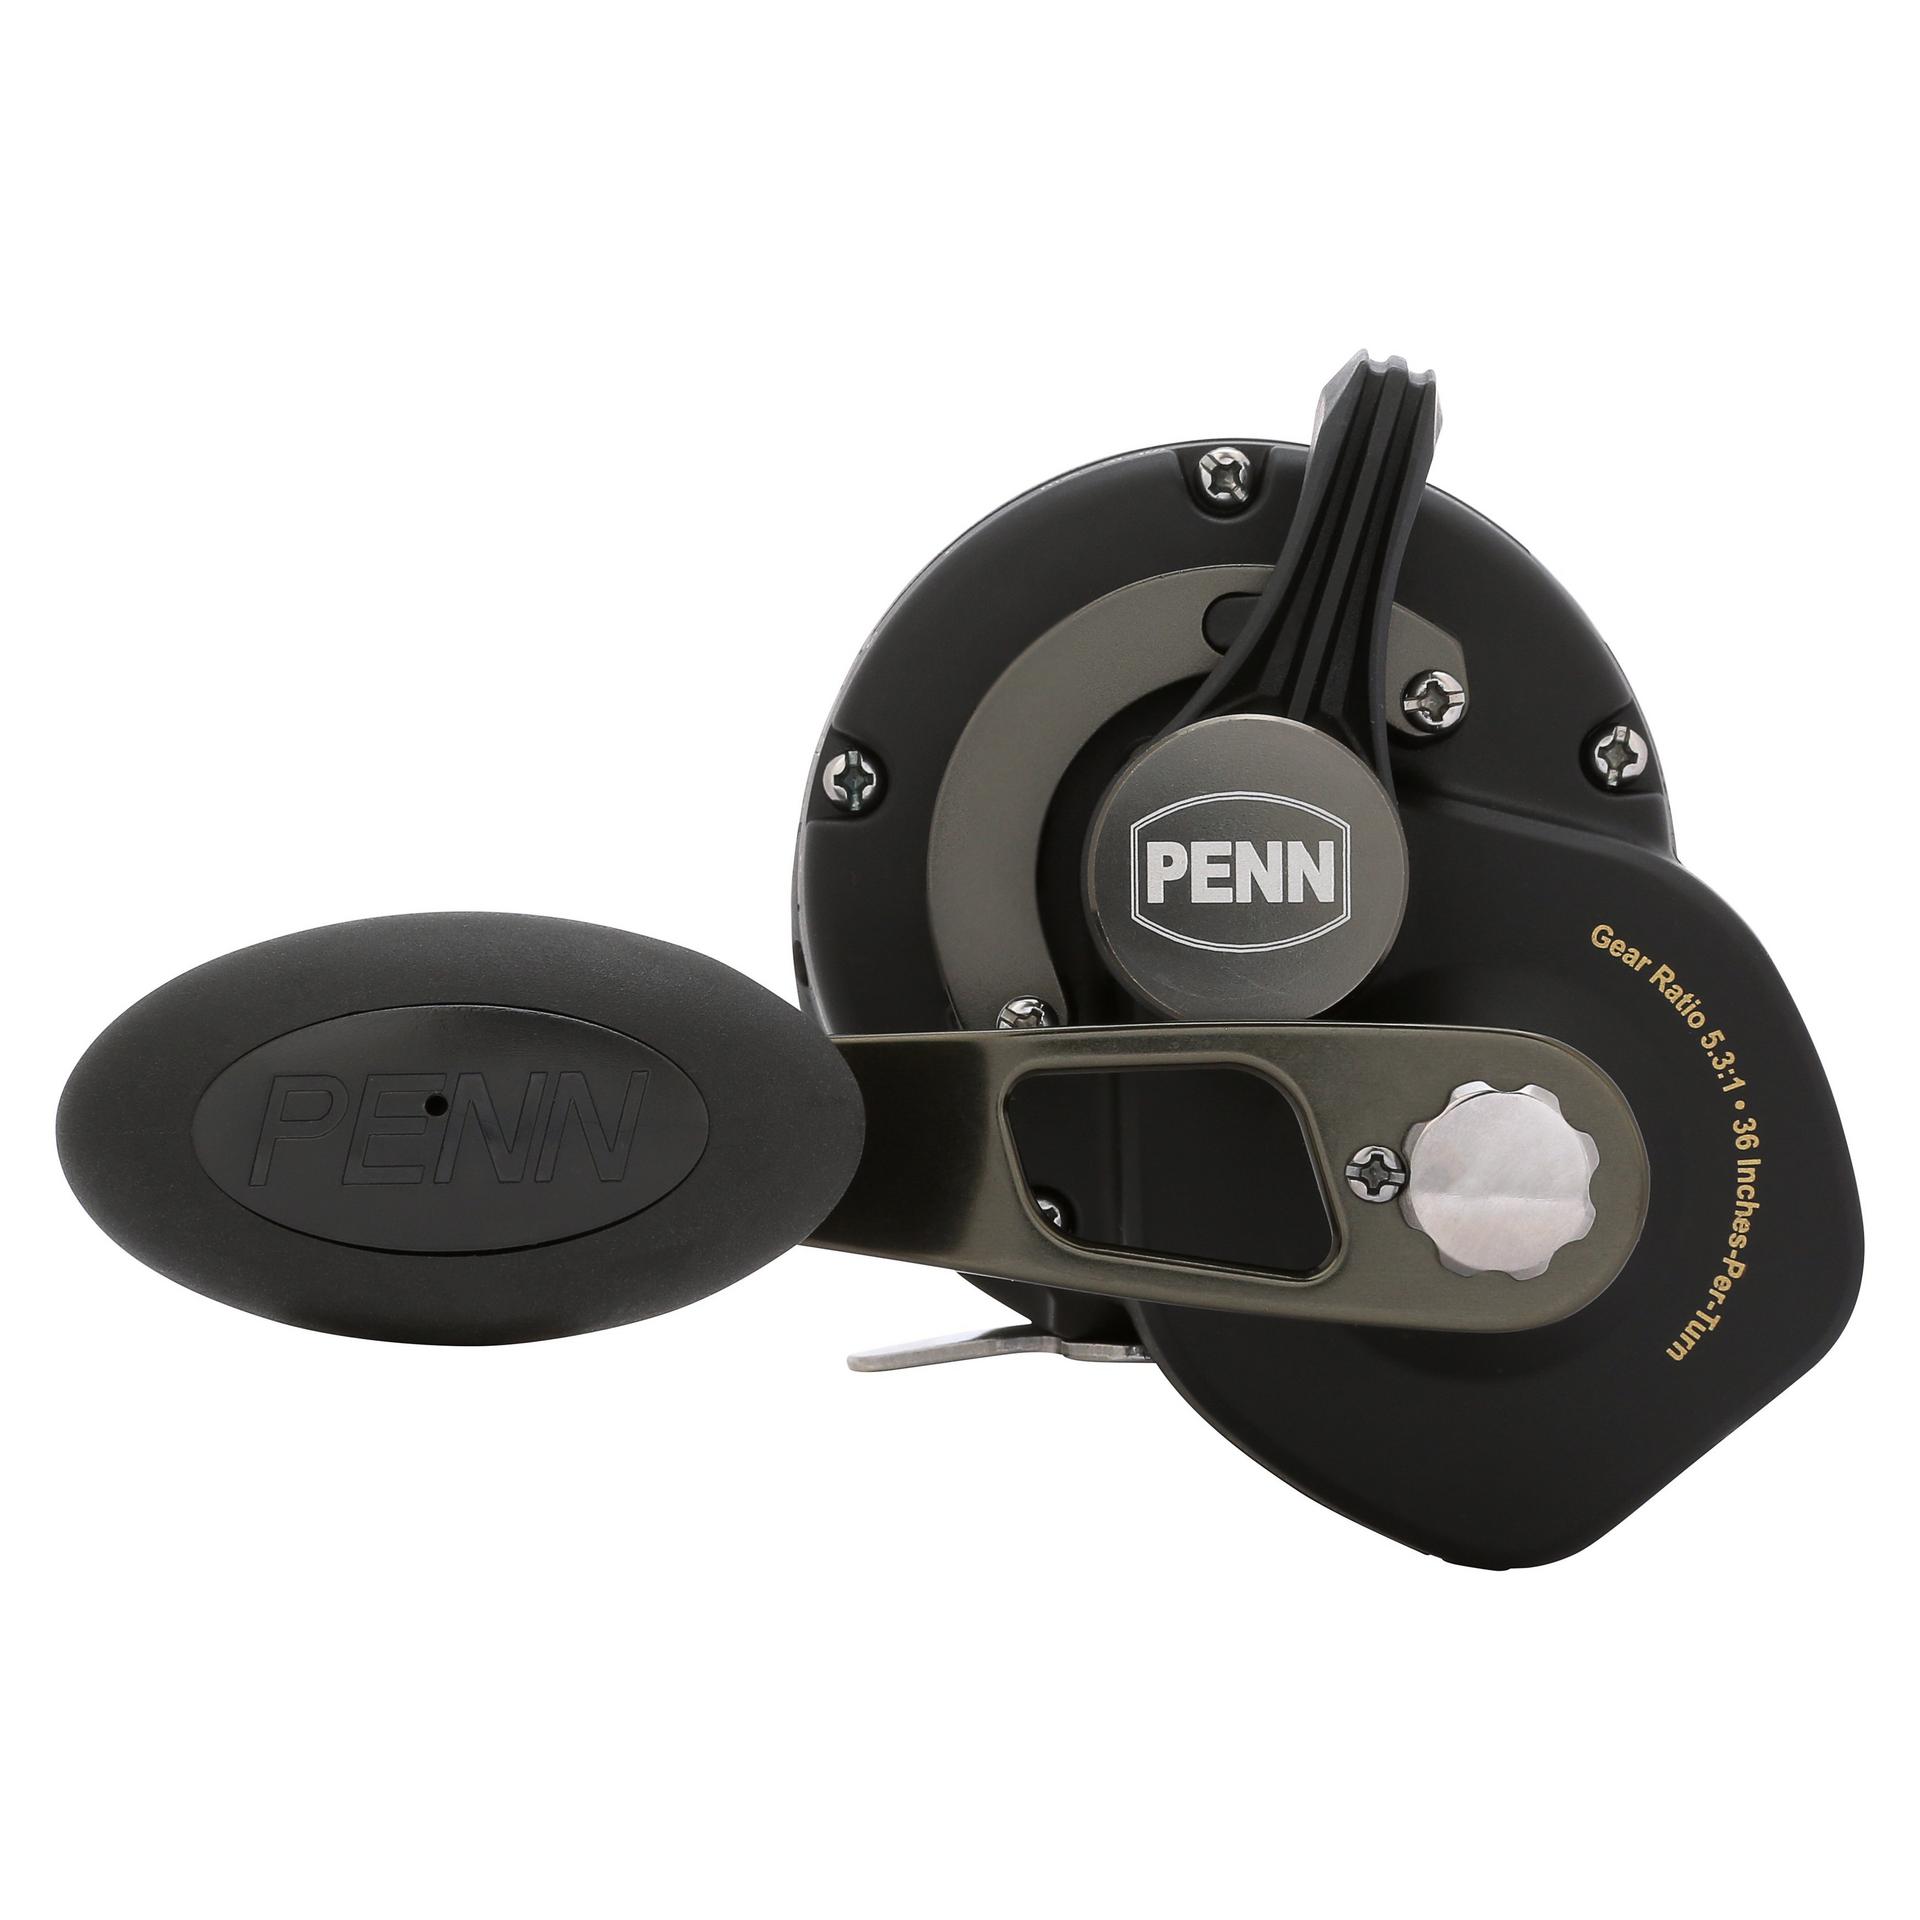 Penn SQUALL Lever Drag SQL30LD Overhead Reel + Delivery + Warranty